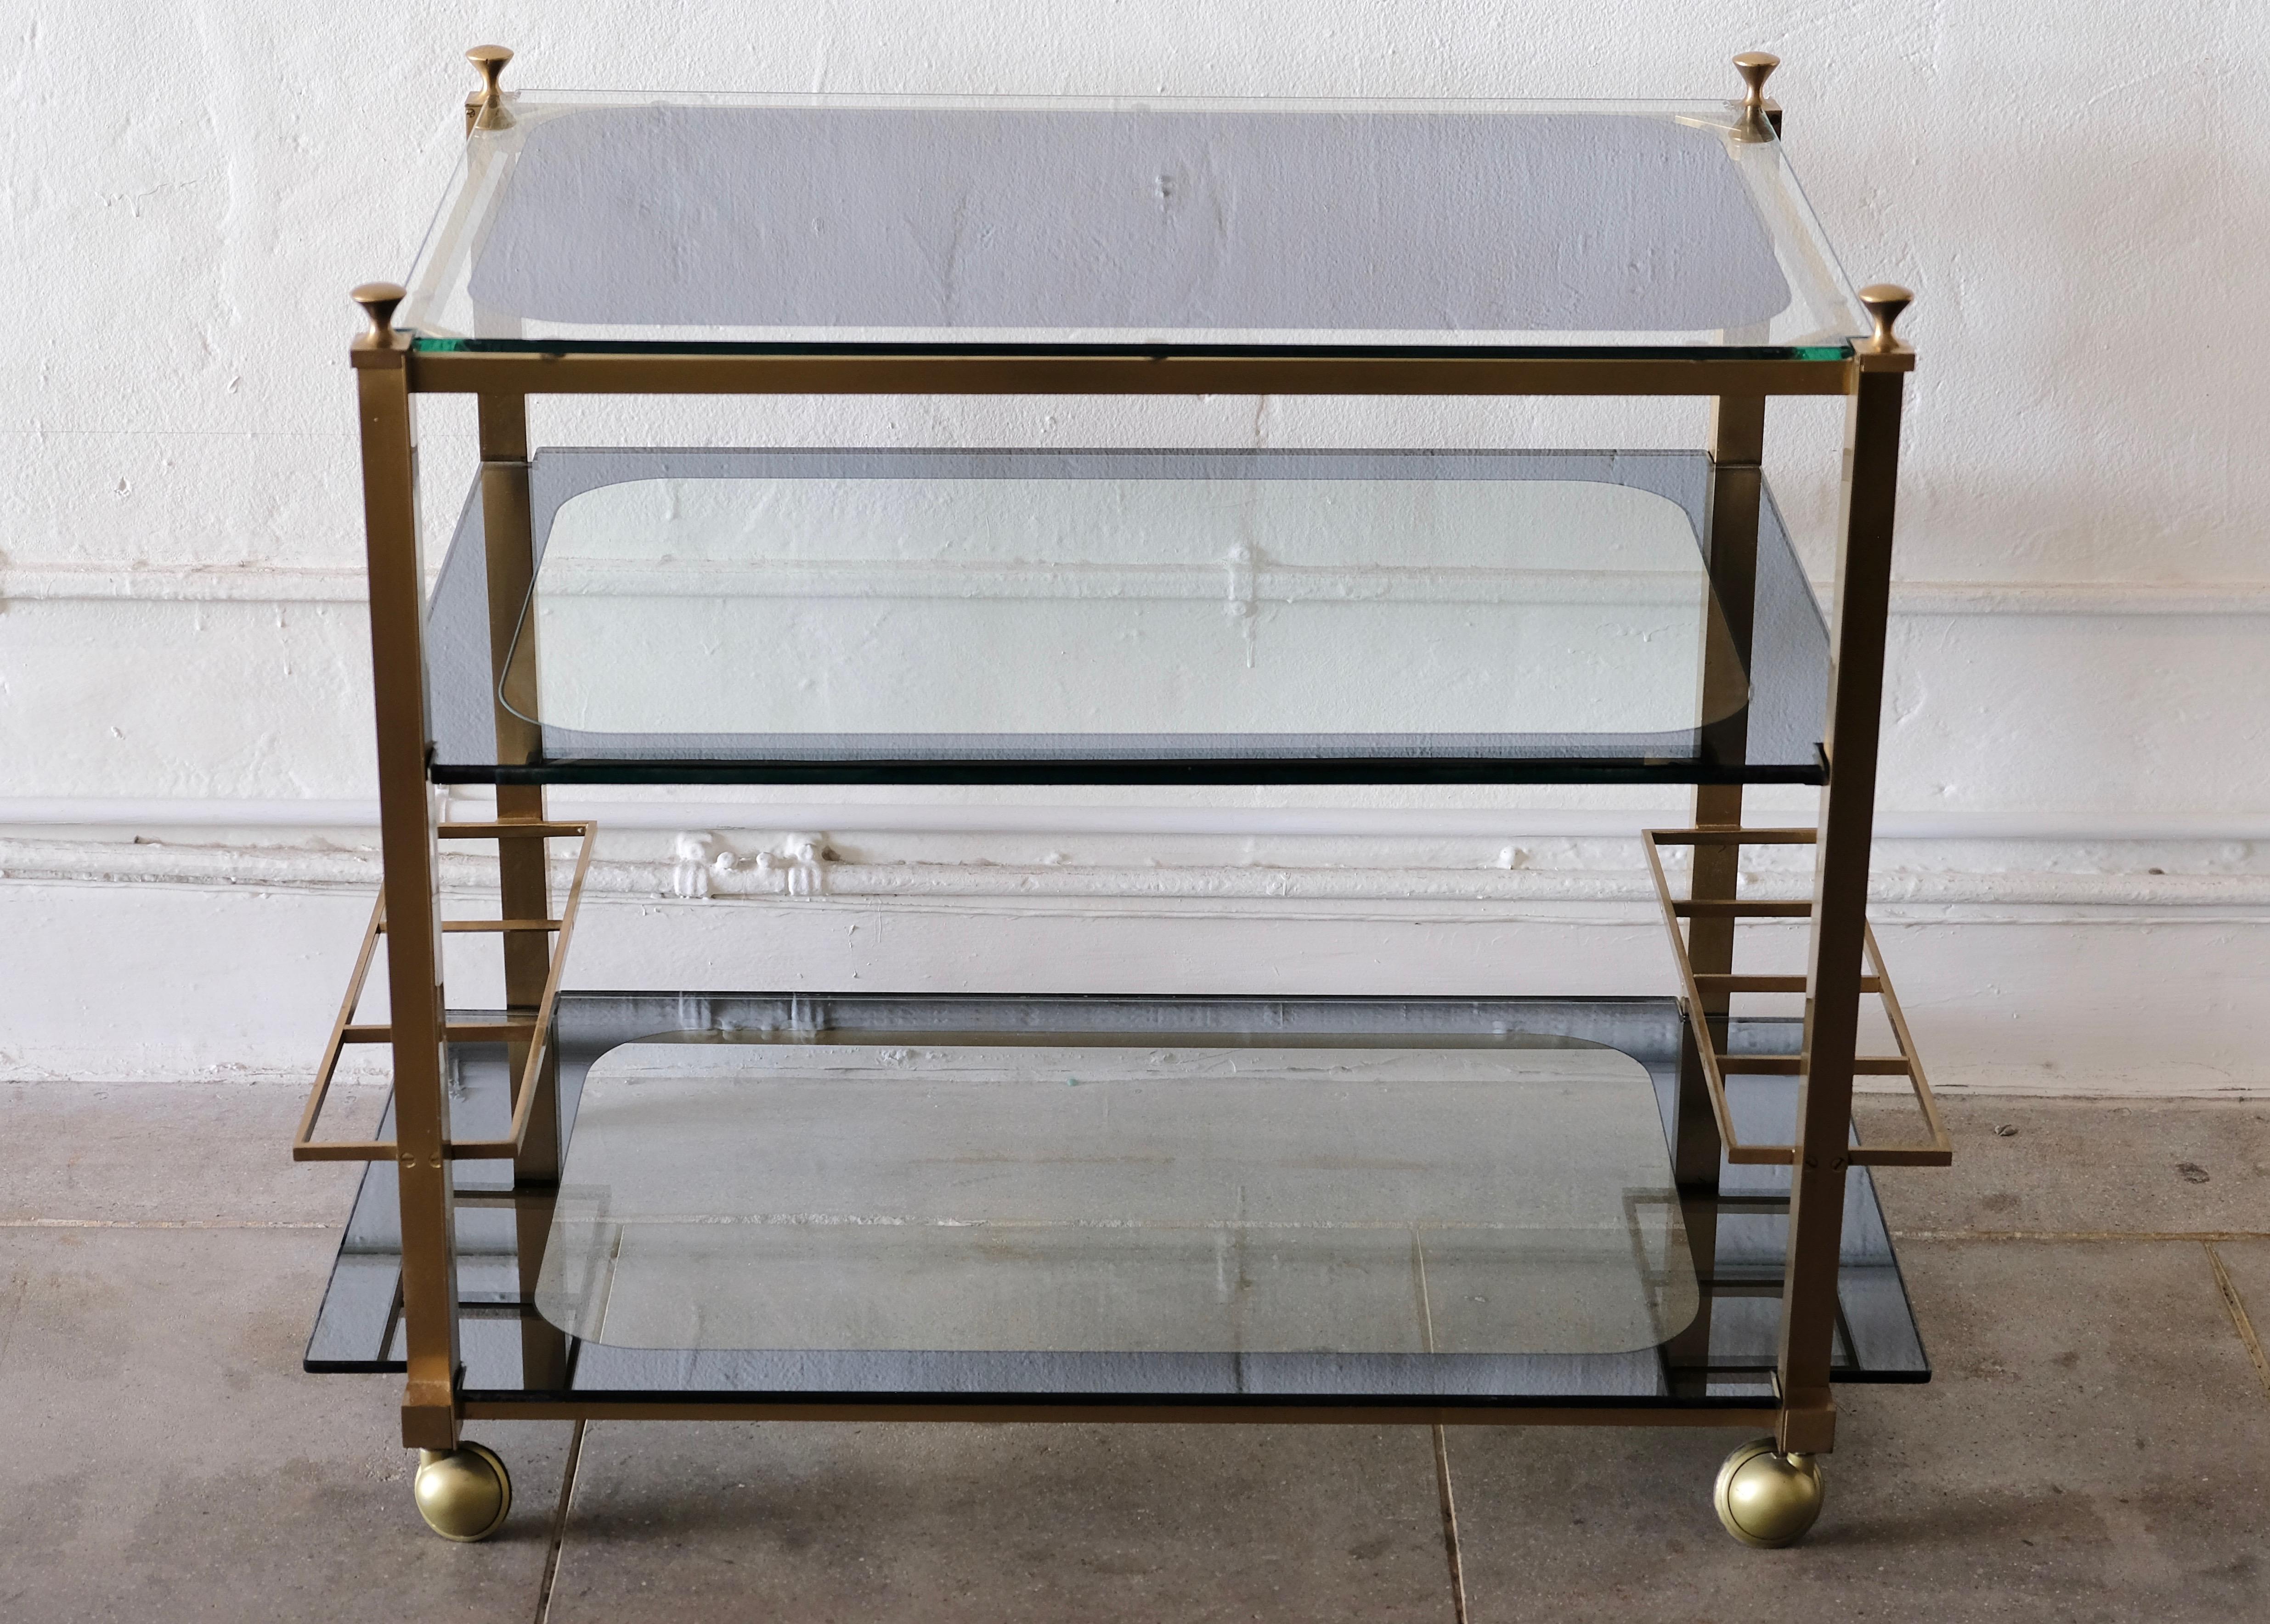 A beautiful vintage three tiered brass bar cart on its original brass casters. The cart has custom reverse painted mirrored glass. The top piece is mostly mirror with glass edge and the bottom two shelves are glass with mirror edge. There are two